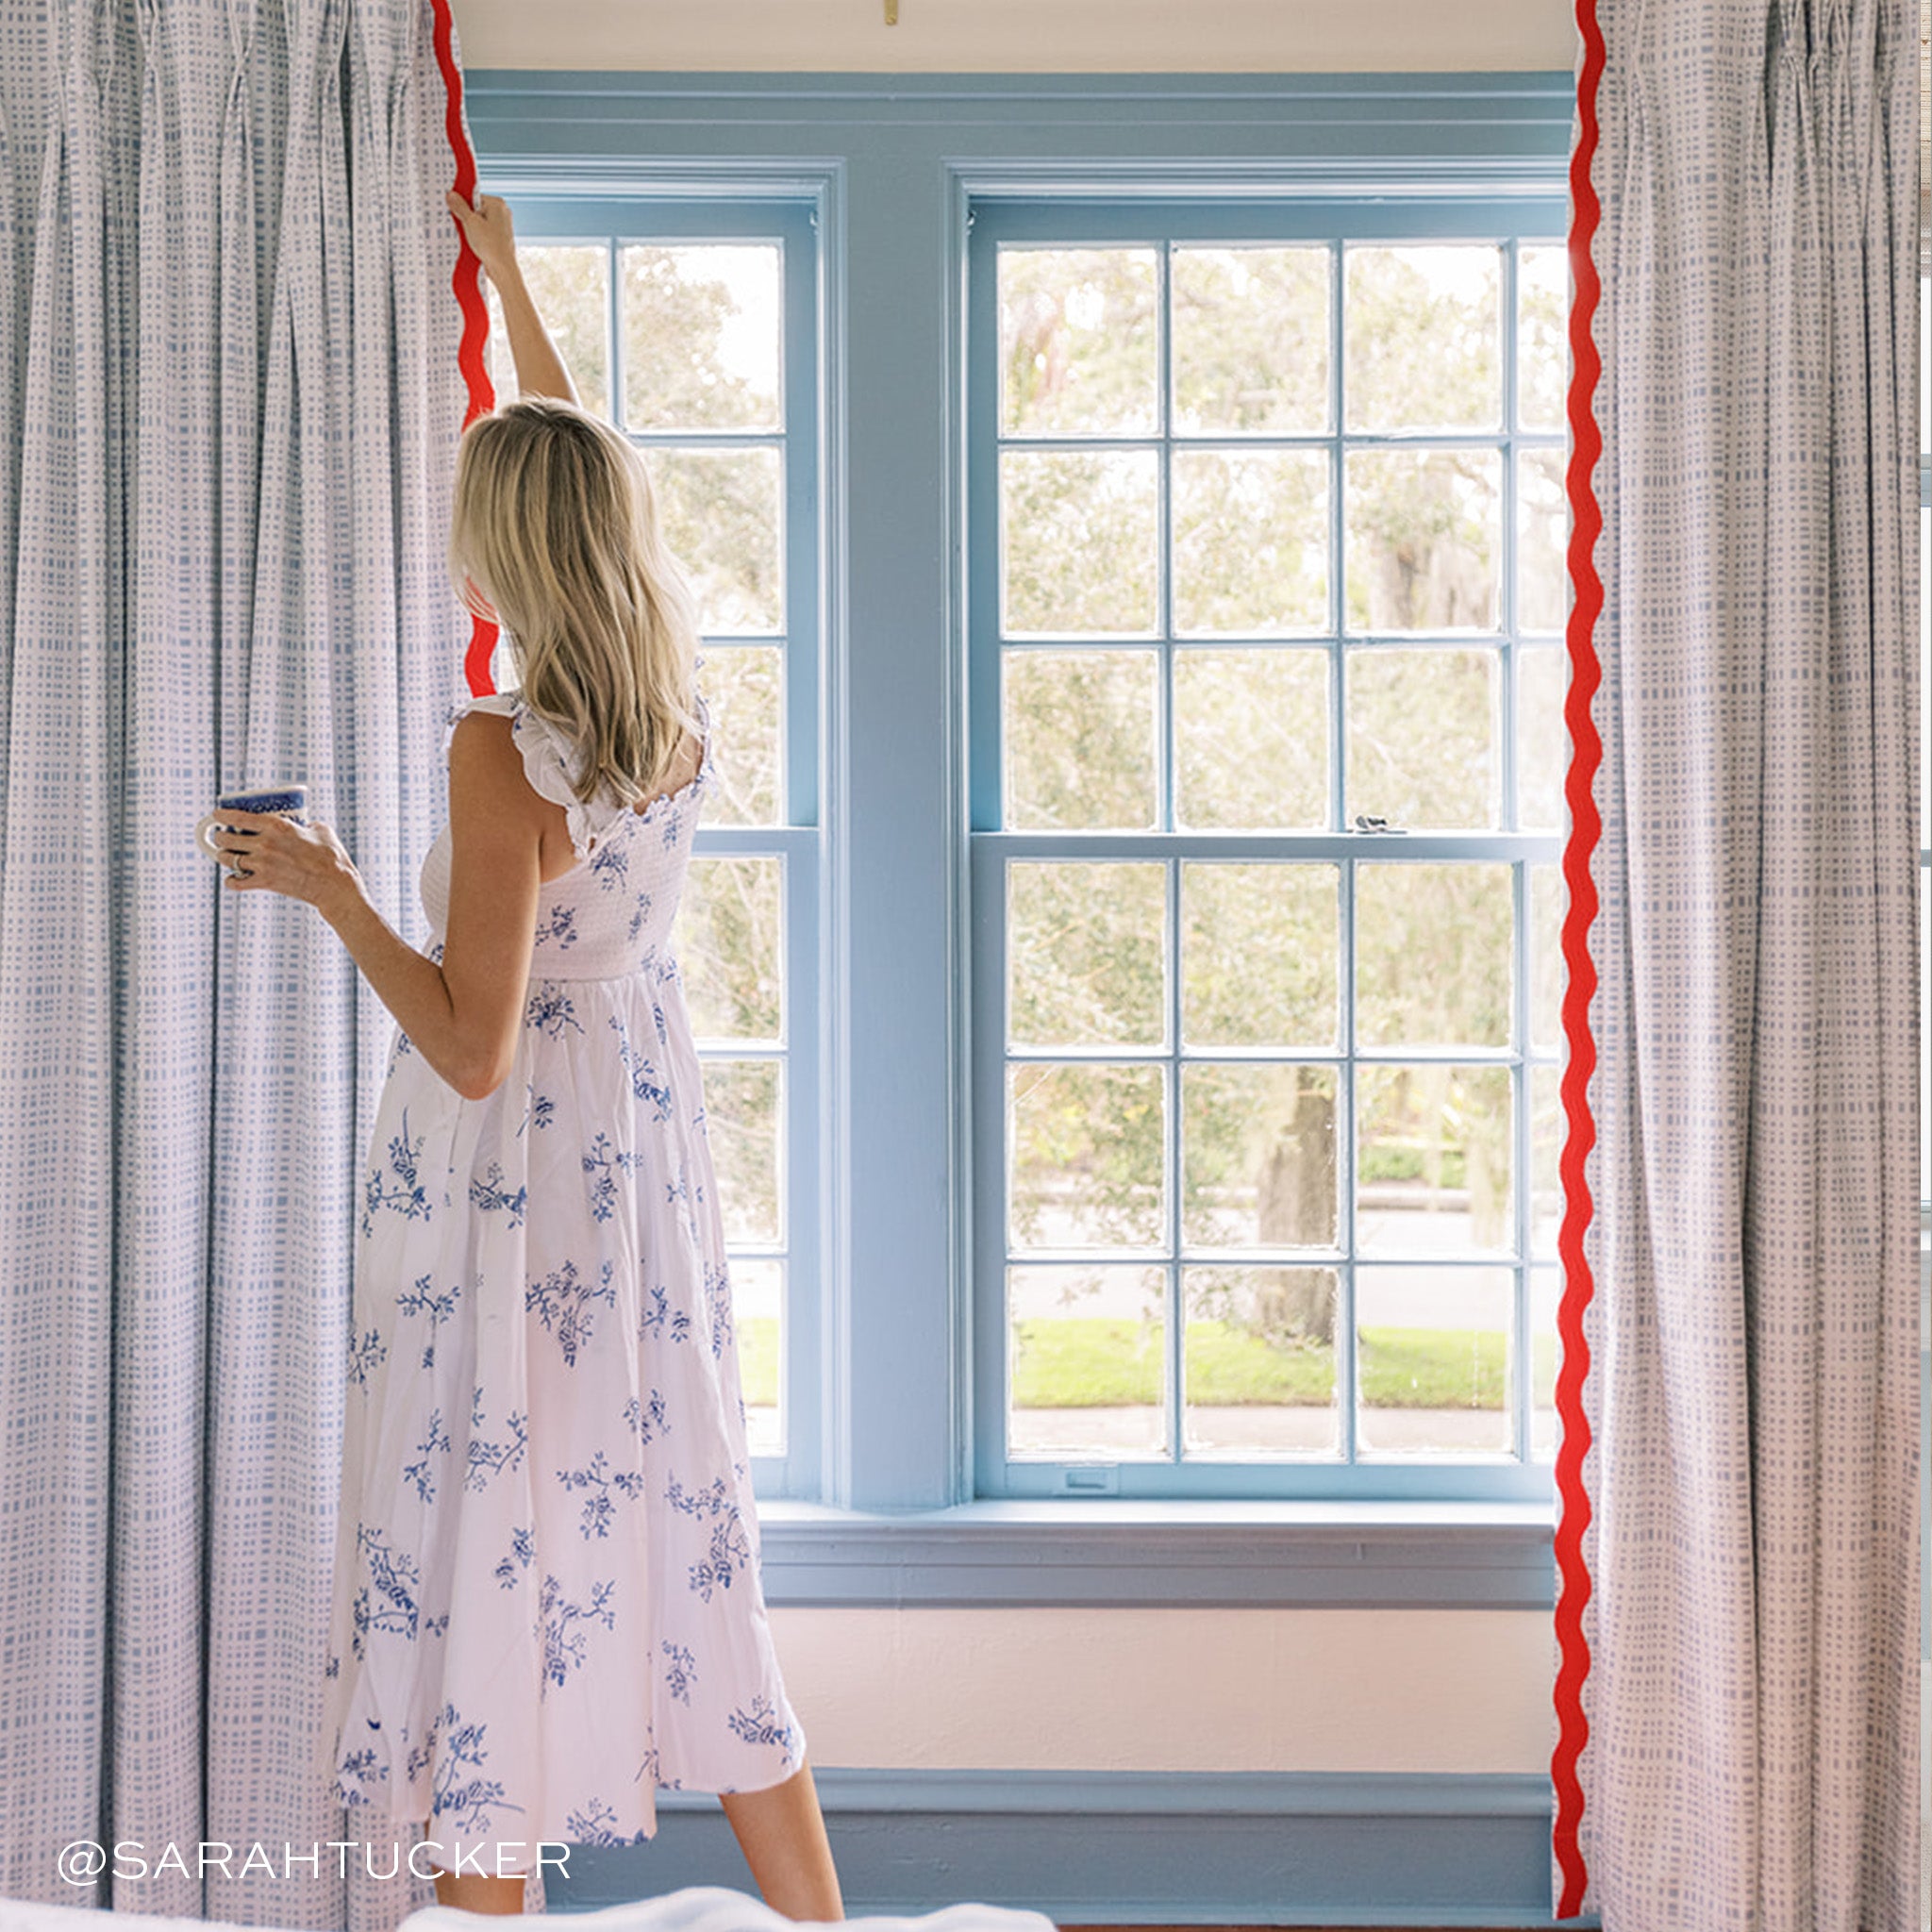 Illuminated window close-up styled with Sky Blue Gingham Printed Curtains with red band being held by blonde woman wearing a white and blue floral dress. Photo taken by Sarah Tucker